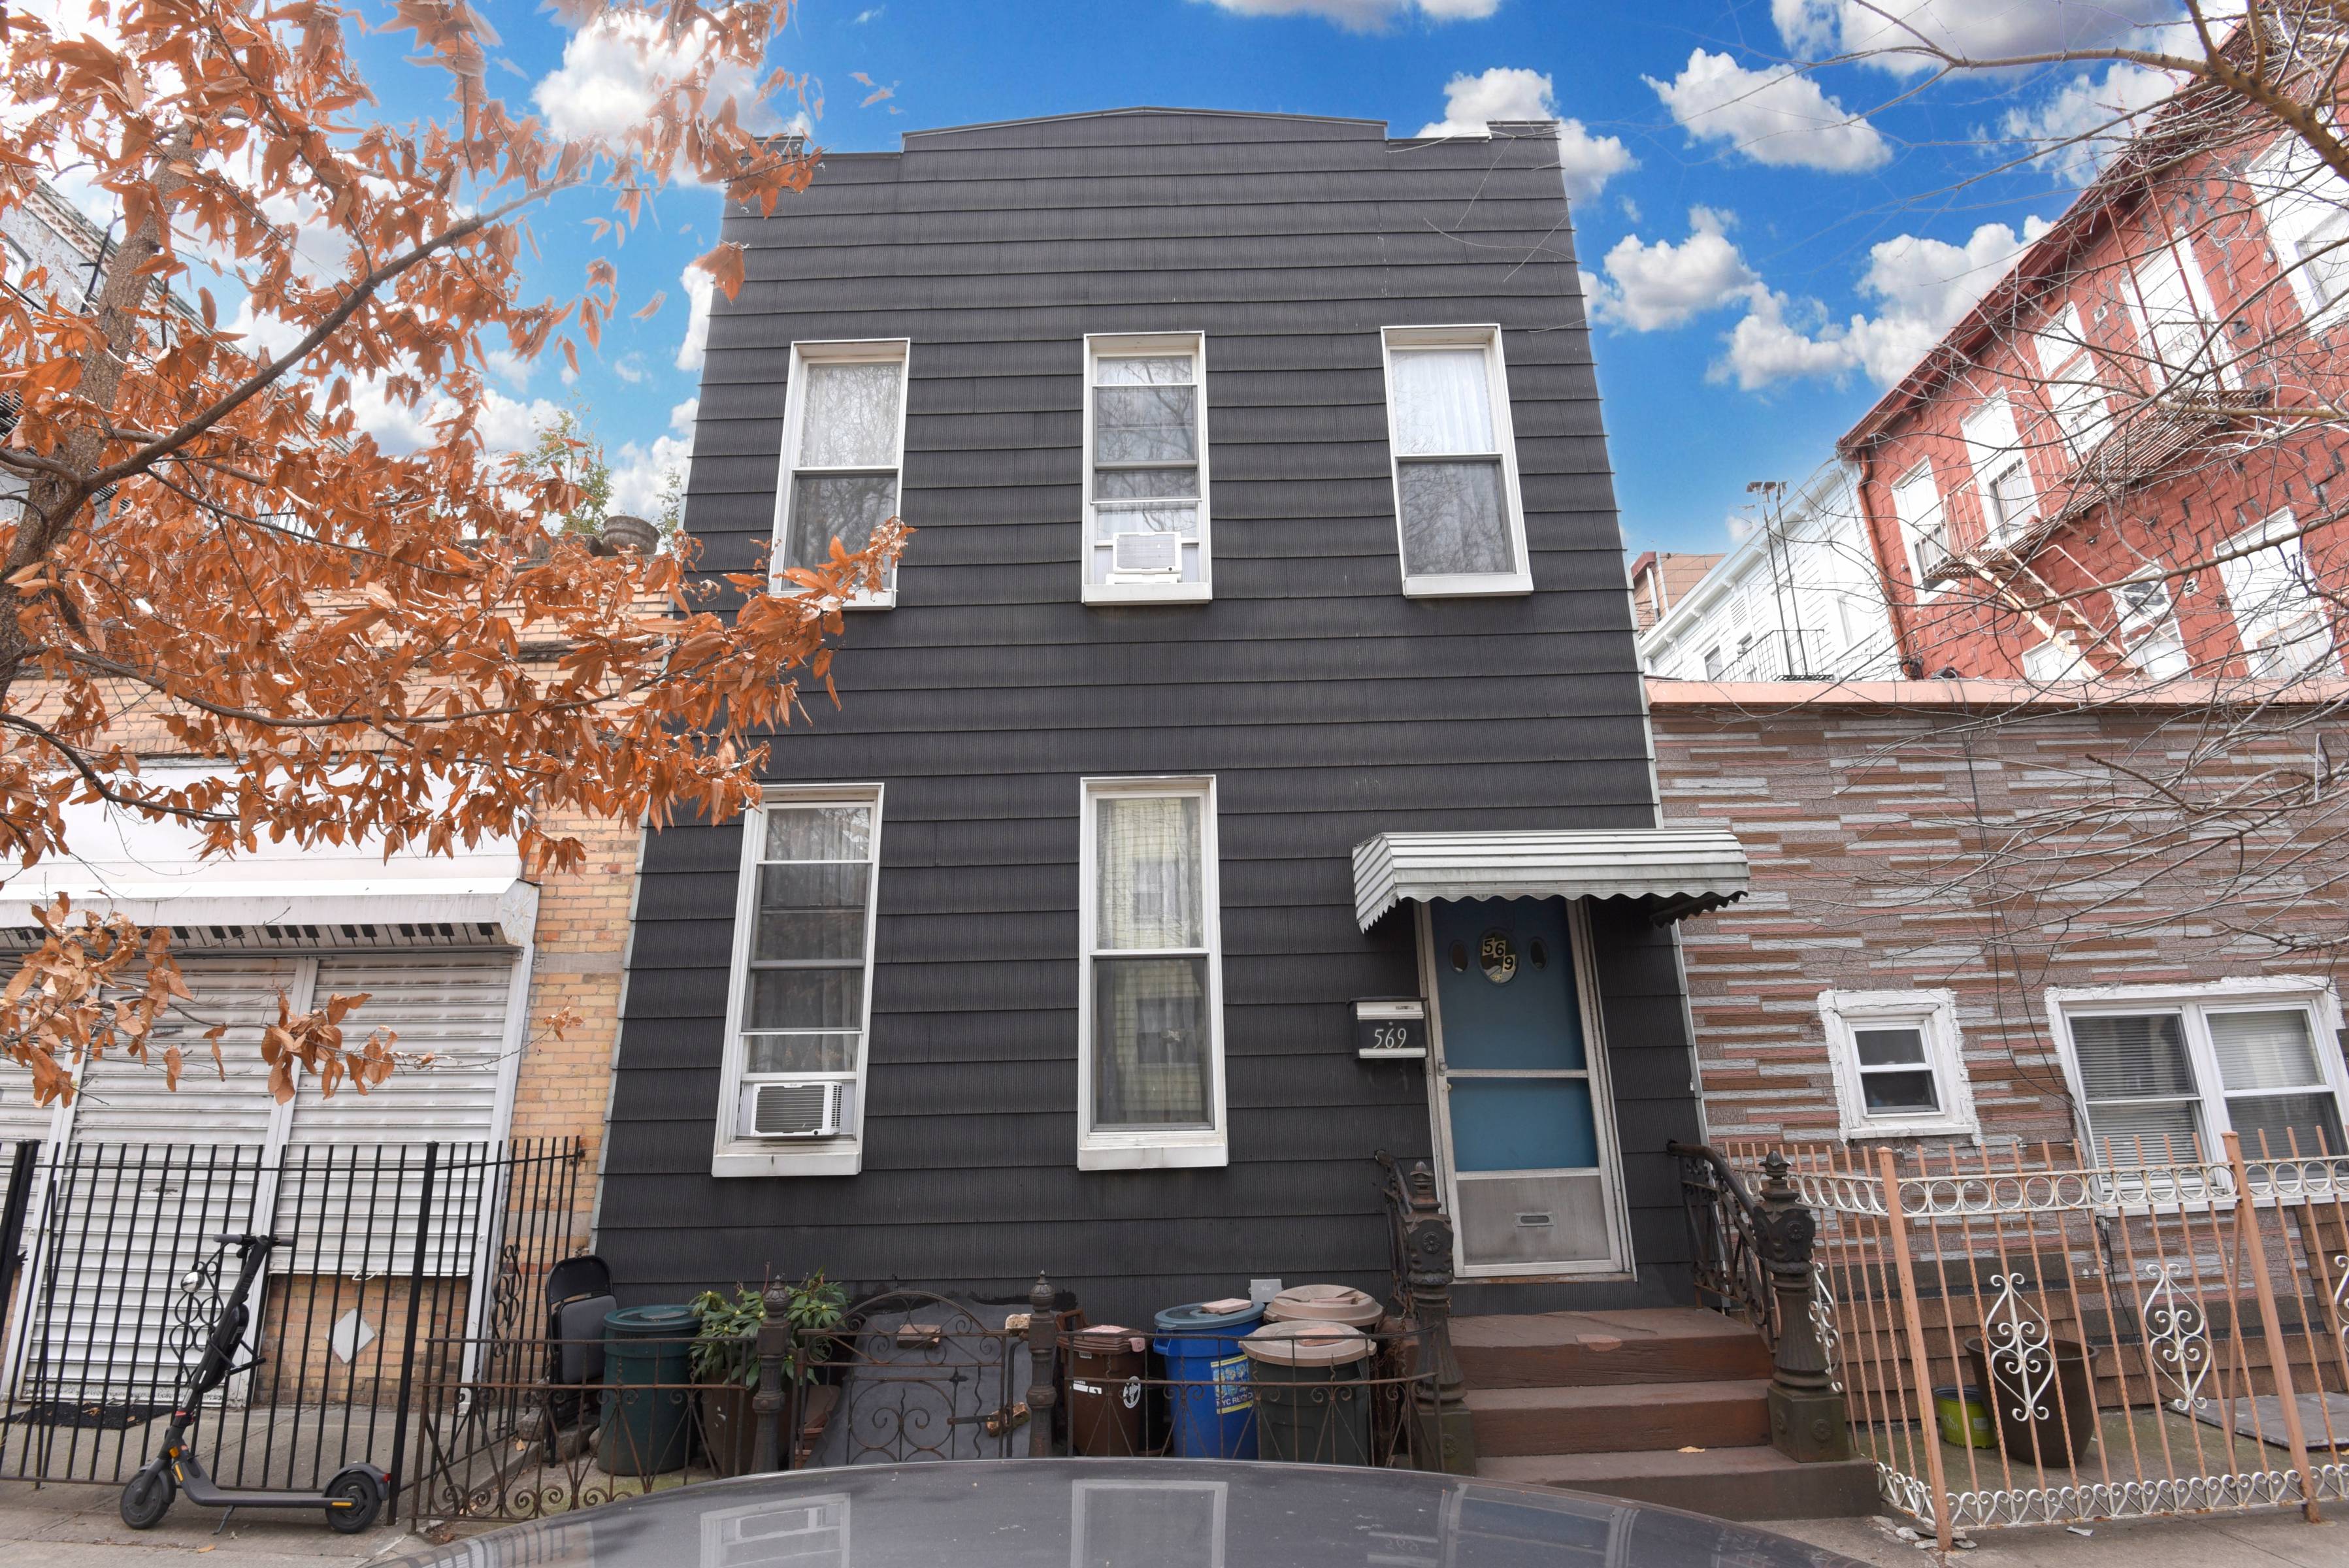 Welcome to 569 Humboldt St, a well maintained single family home in the heart of Greenpoint.